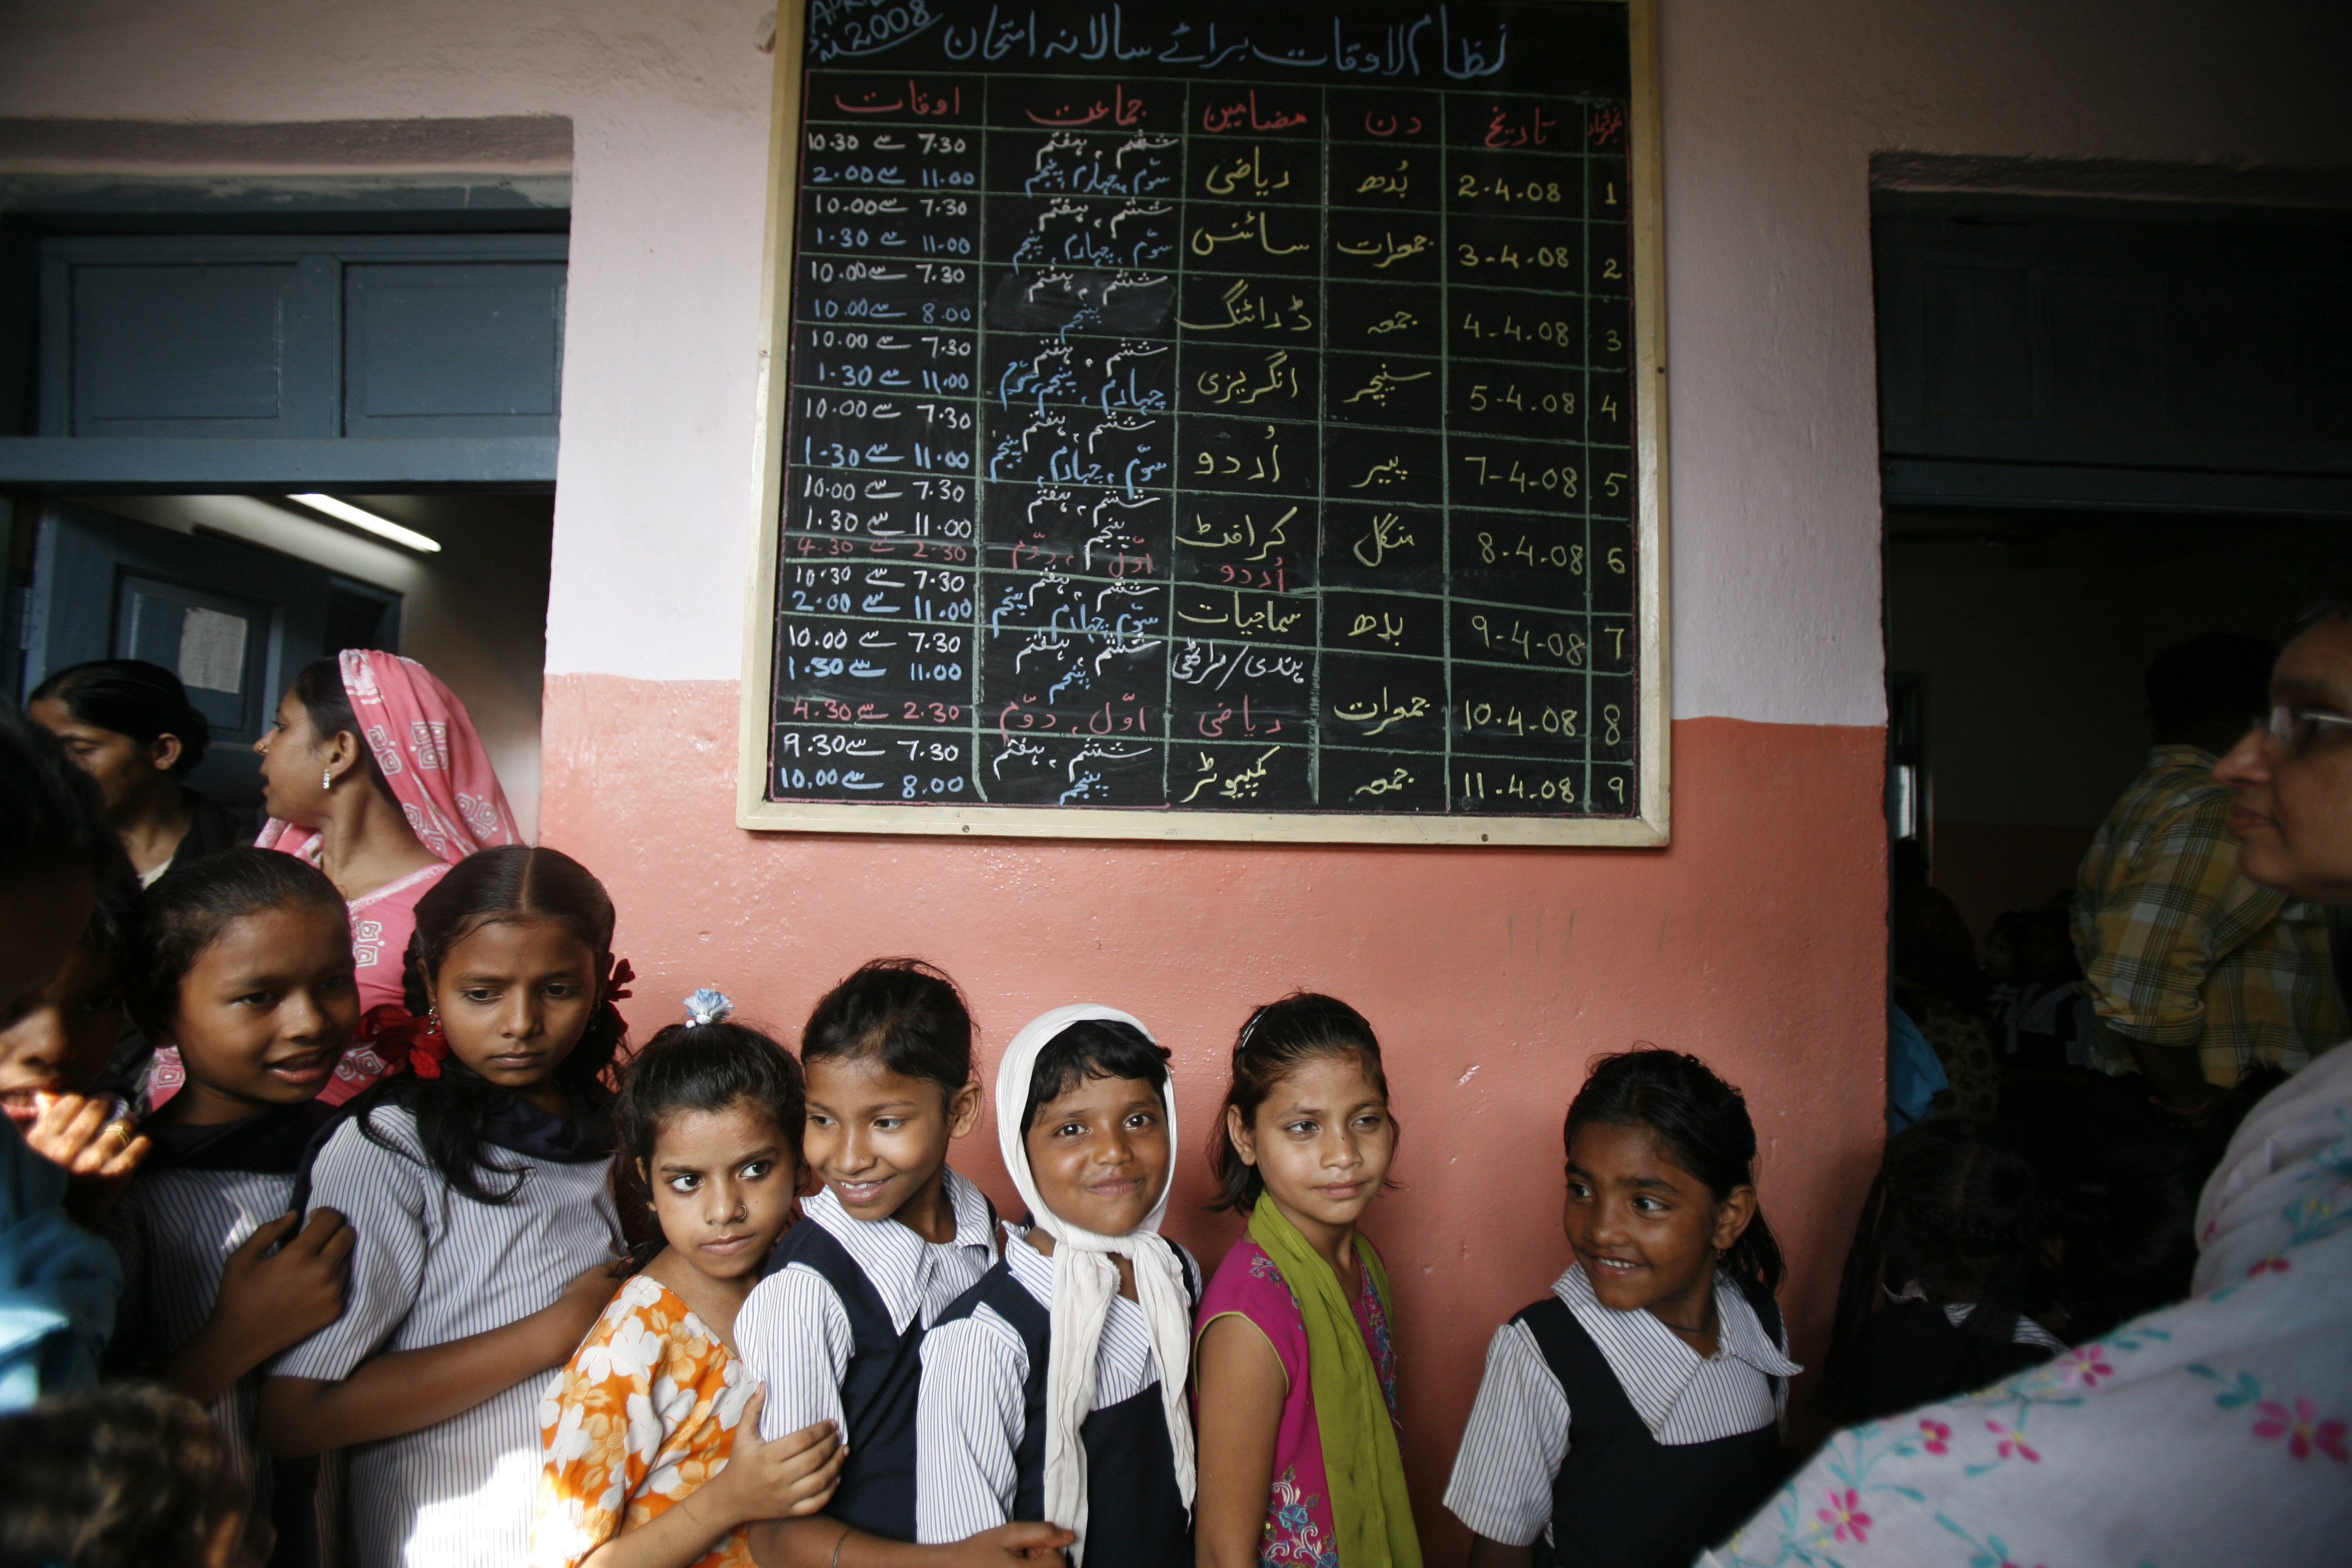 Girl Child Education: The Importance of Empowering Girls through Education